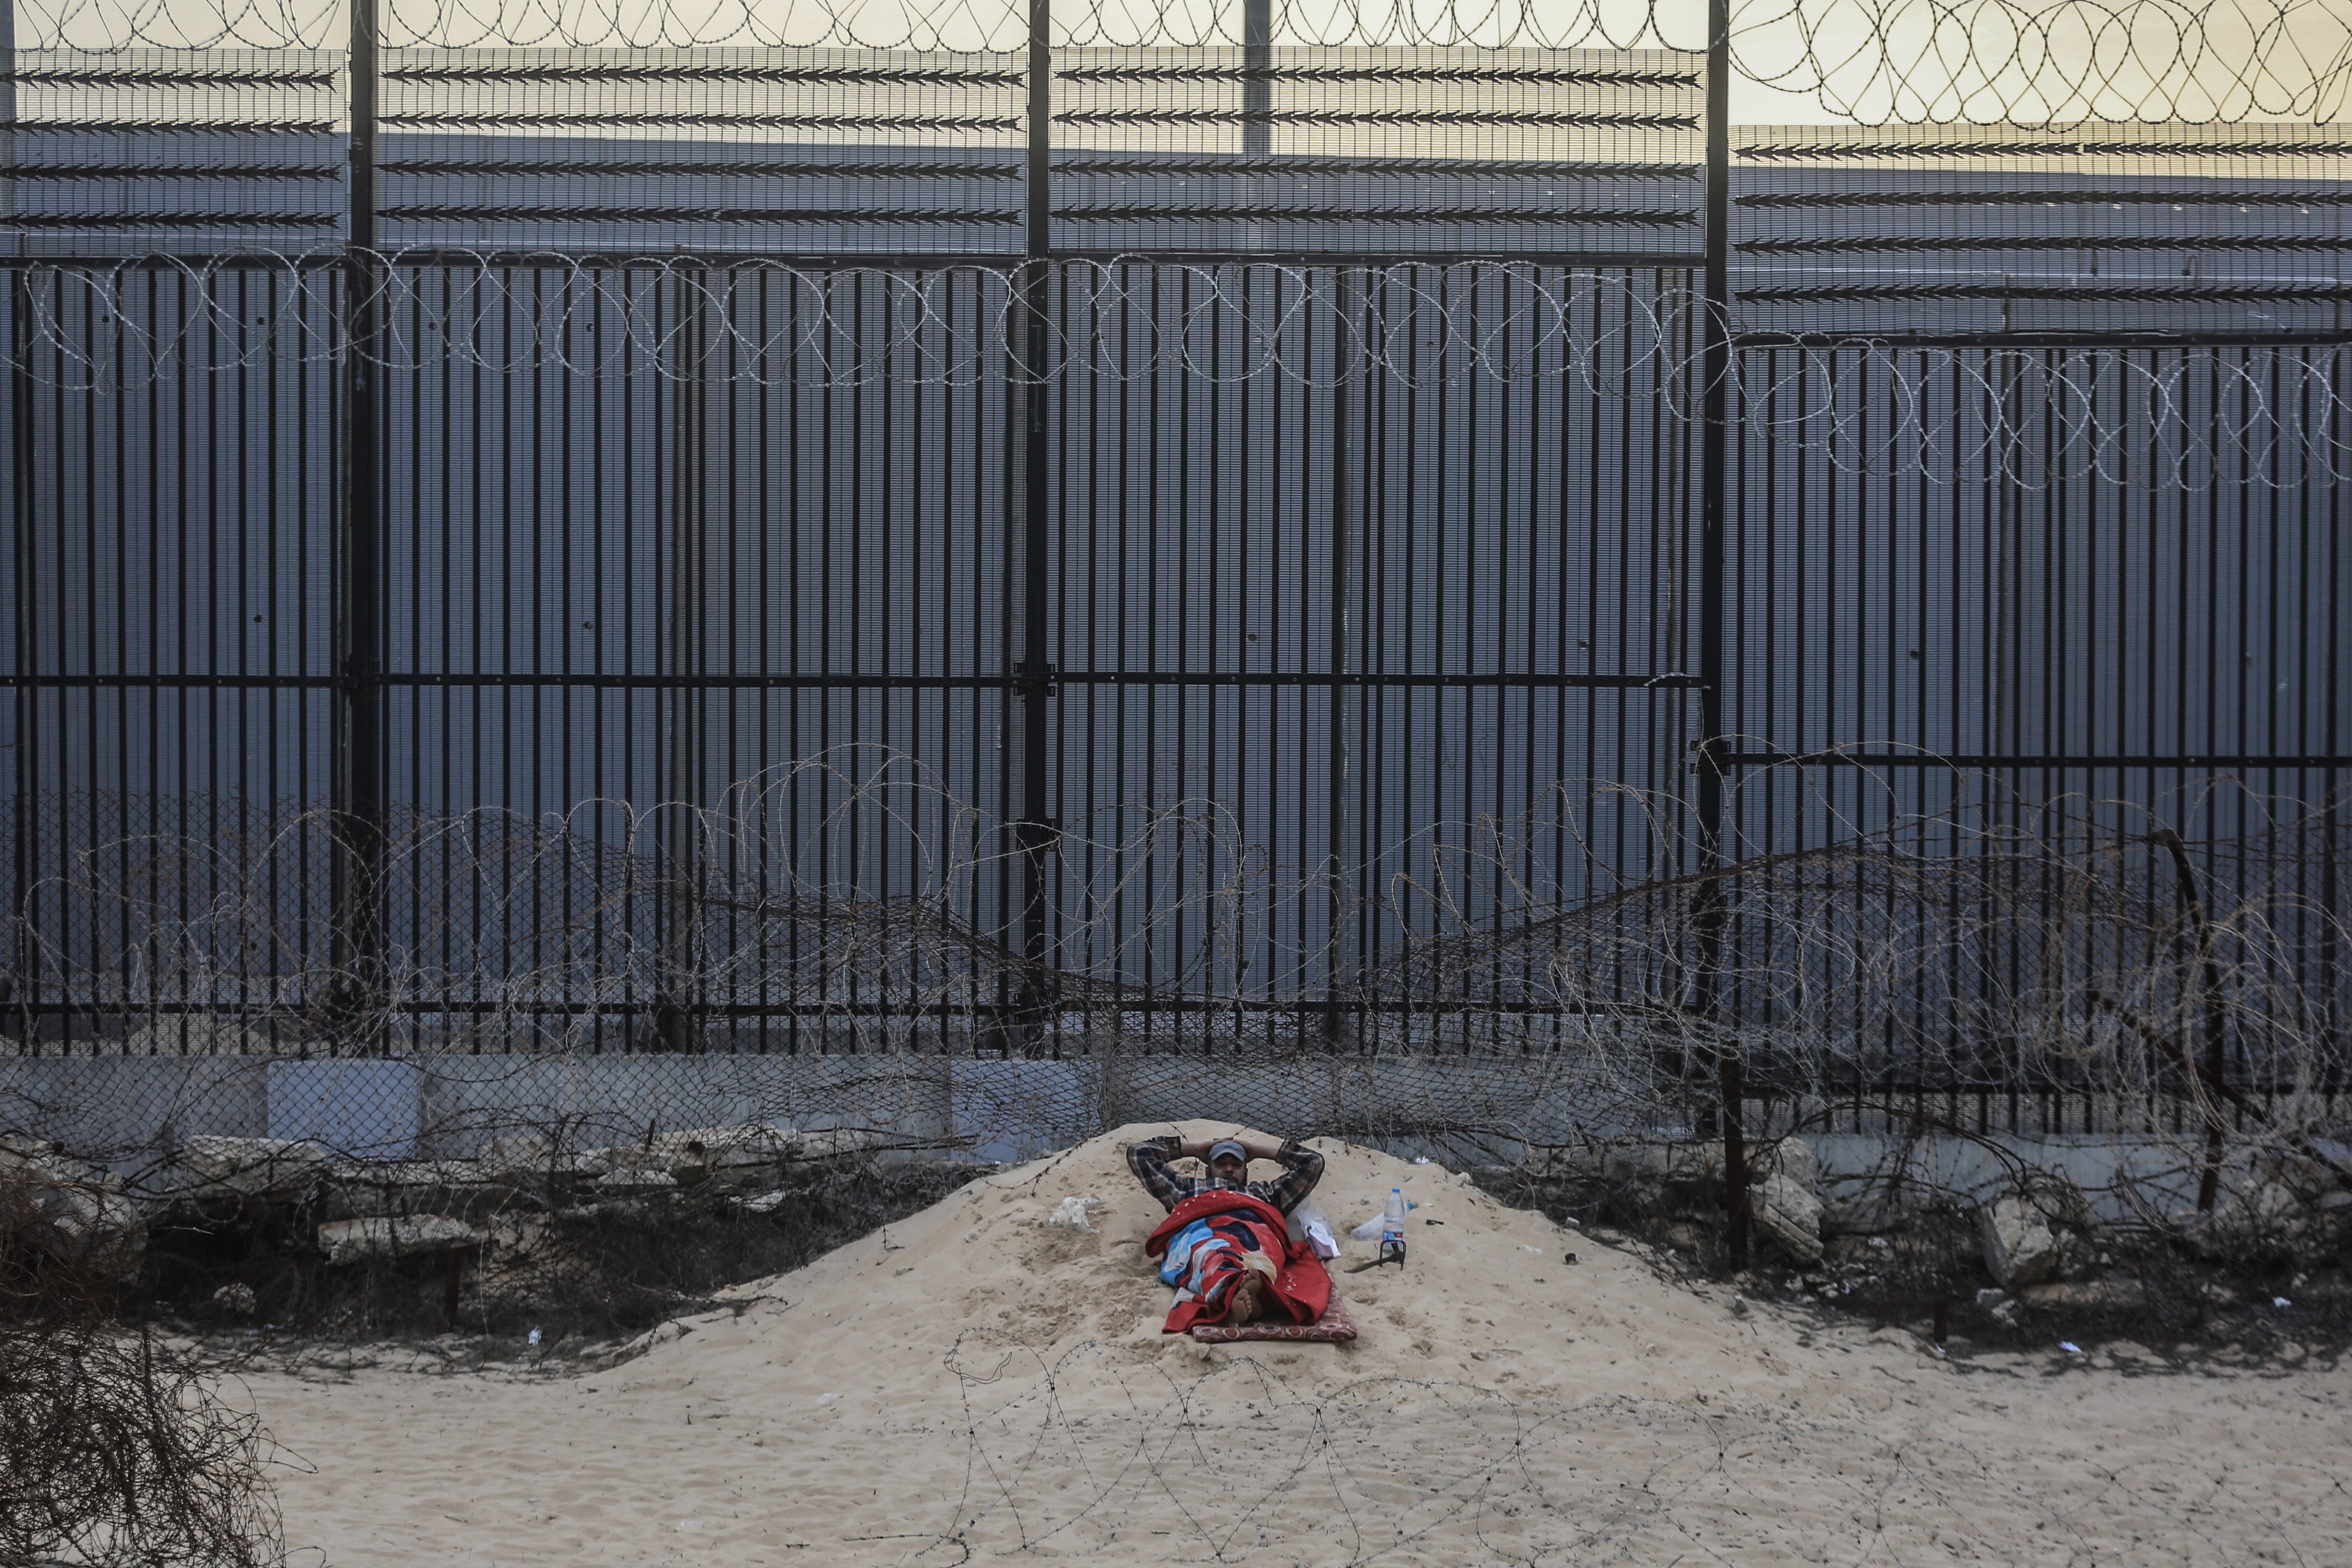 A Palestinian man rests near the wall separating Egypt and the Gaza Strip. Photo: dpa